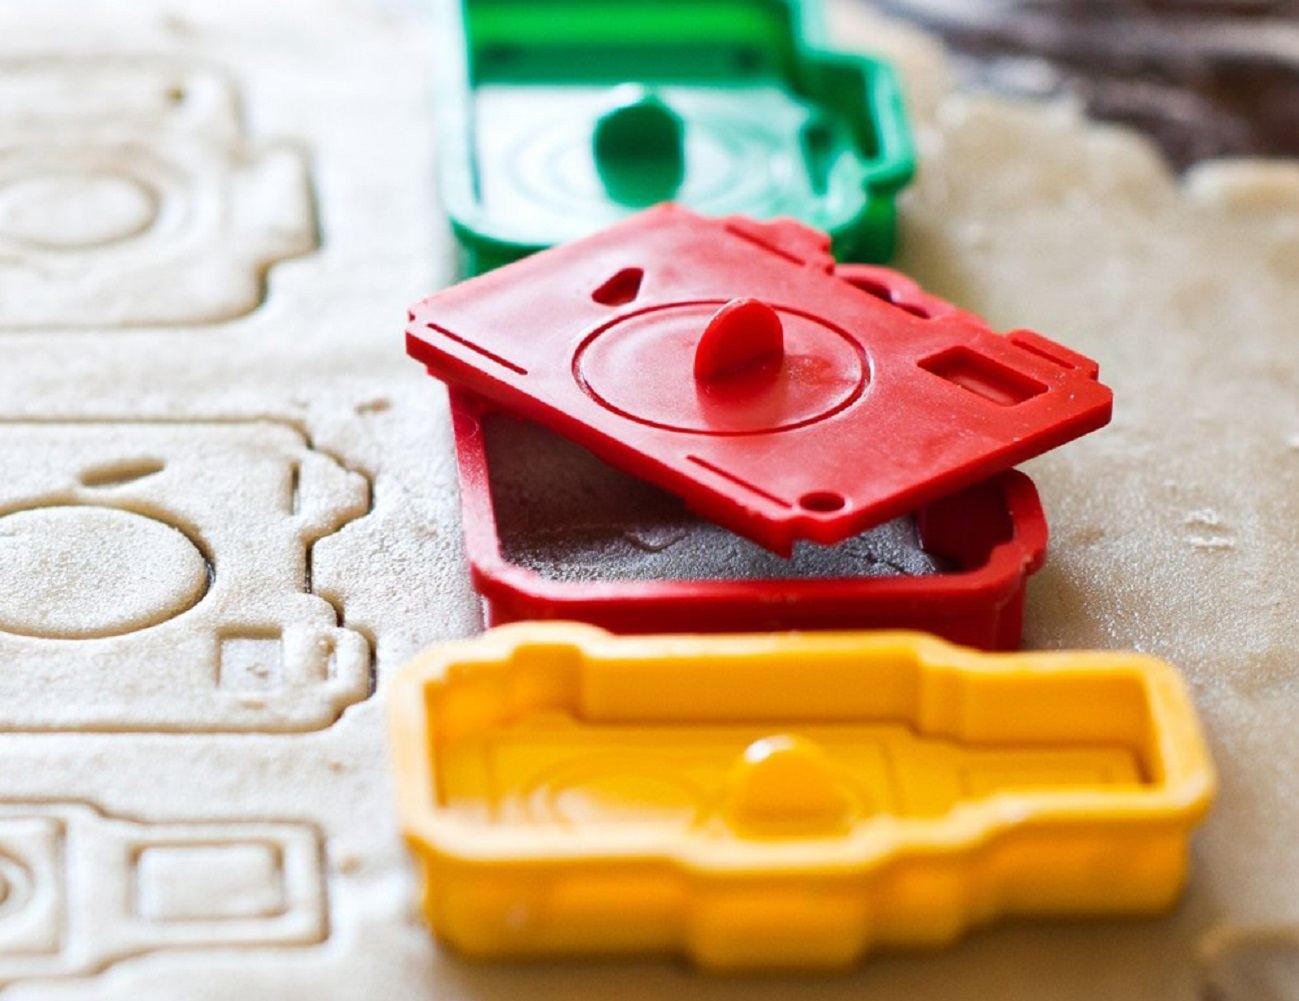 Camera Cookie Cutters have fun photographic designs